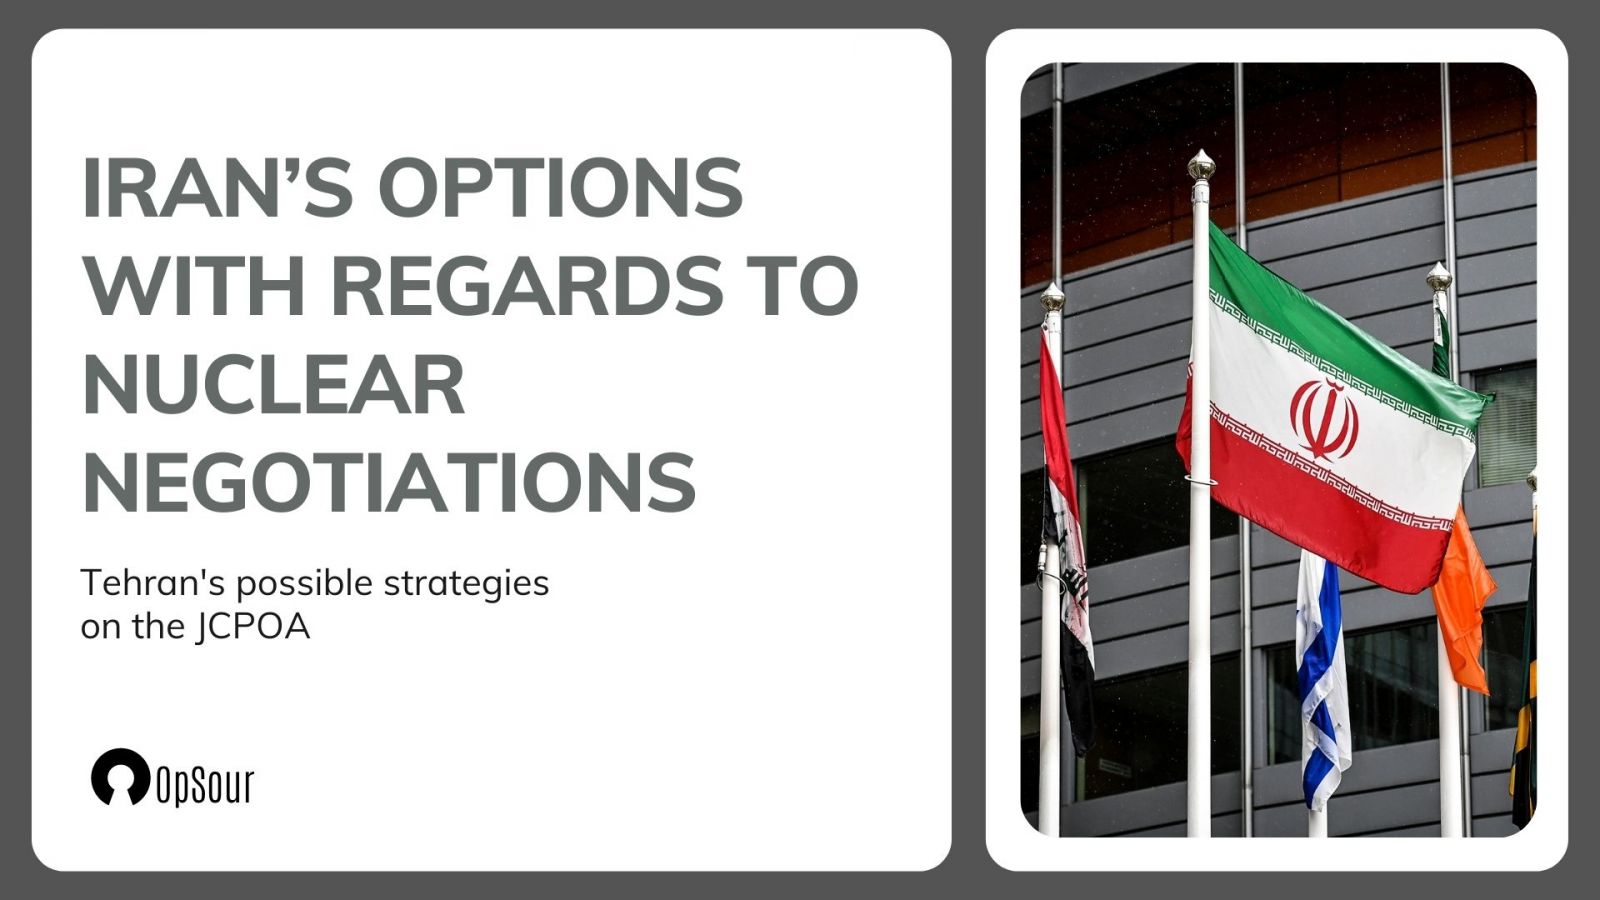 Iran’s Options with regards to Nuclear Negotiations